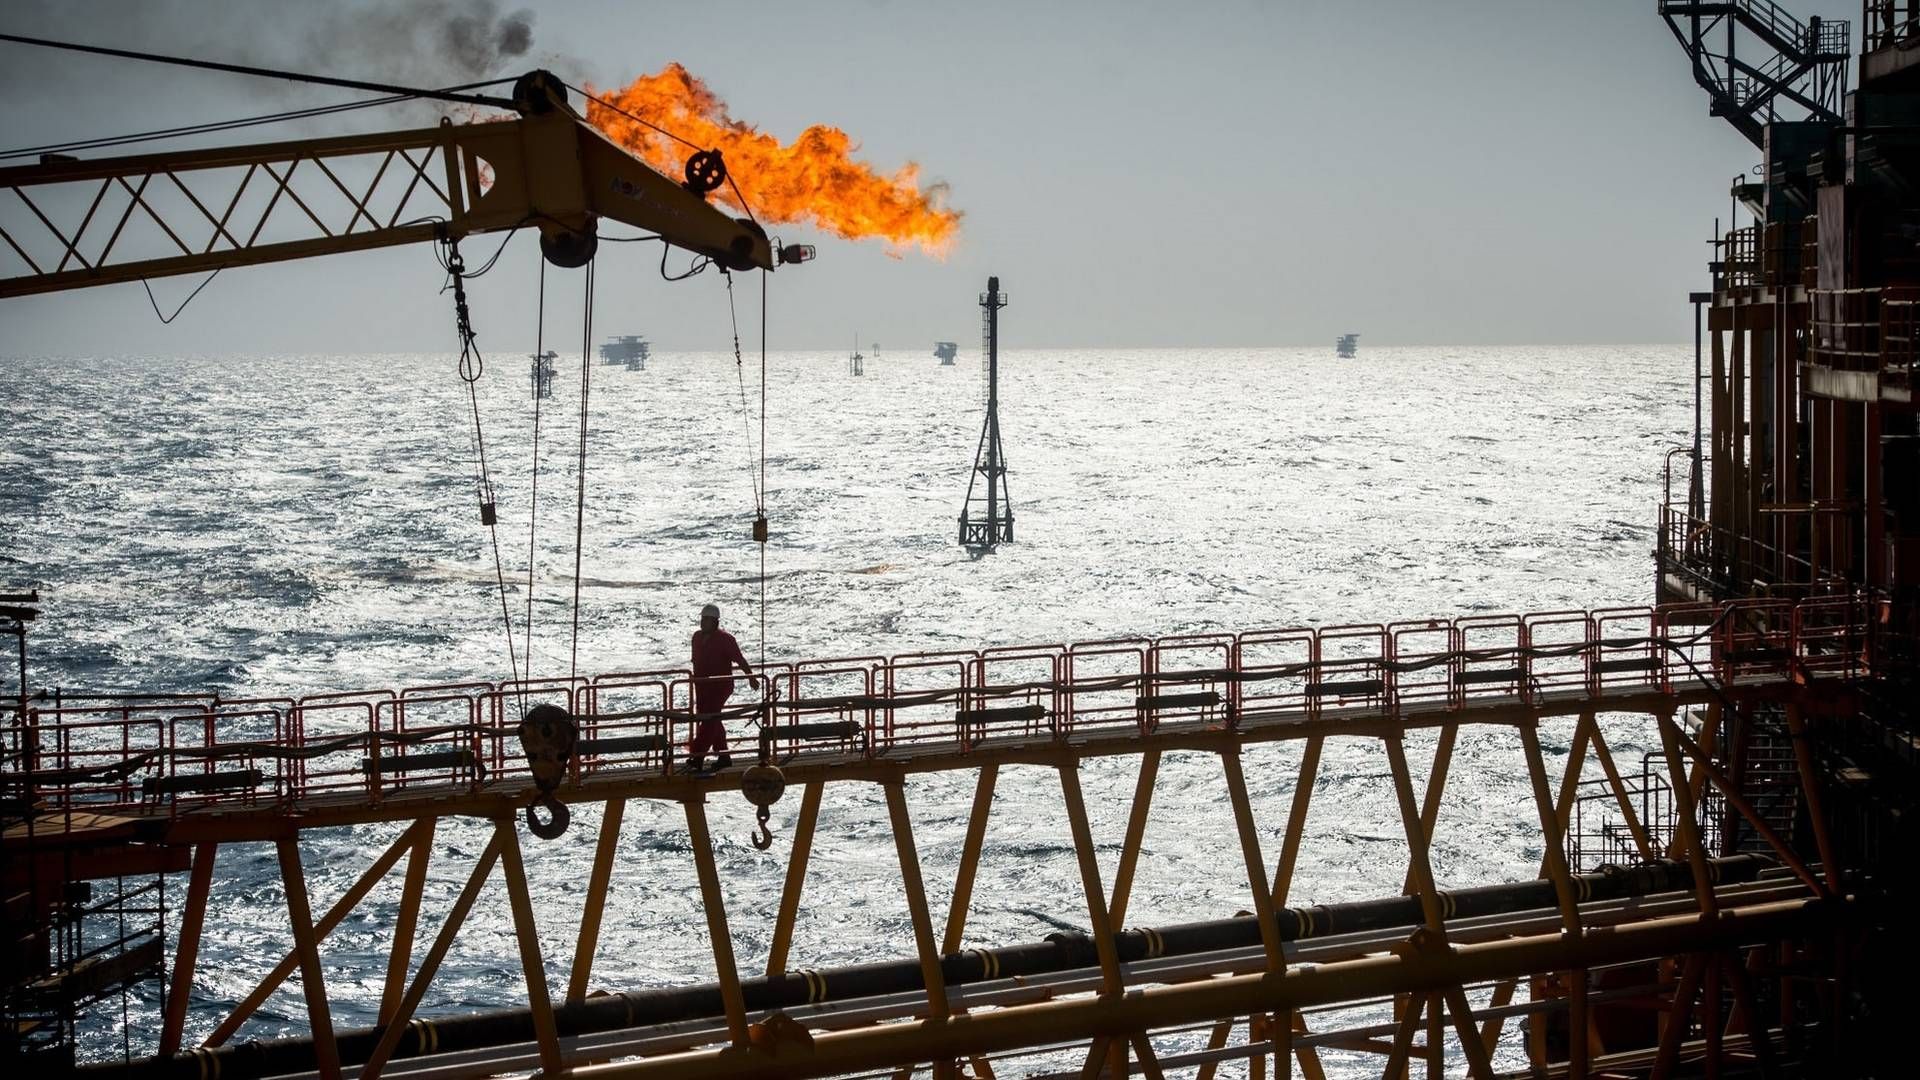 The sudden drop in the oil price and the coronavirus outbreak created negative conditions for offshore companies. Many oil projects have been put on hold and there continues to be an oversupply of vessels in the market. | Photo: Bloomberg/Bloomberg